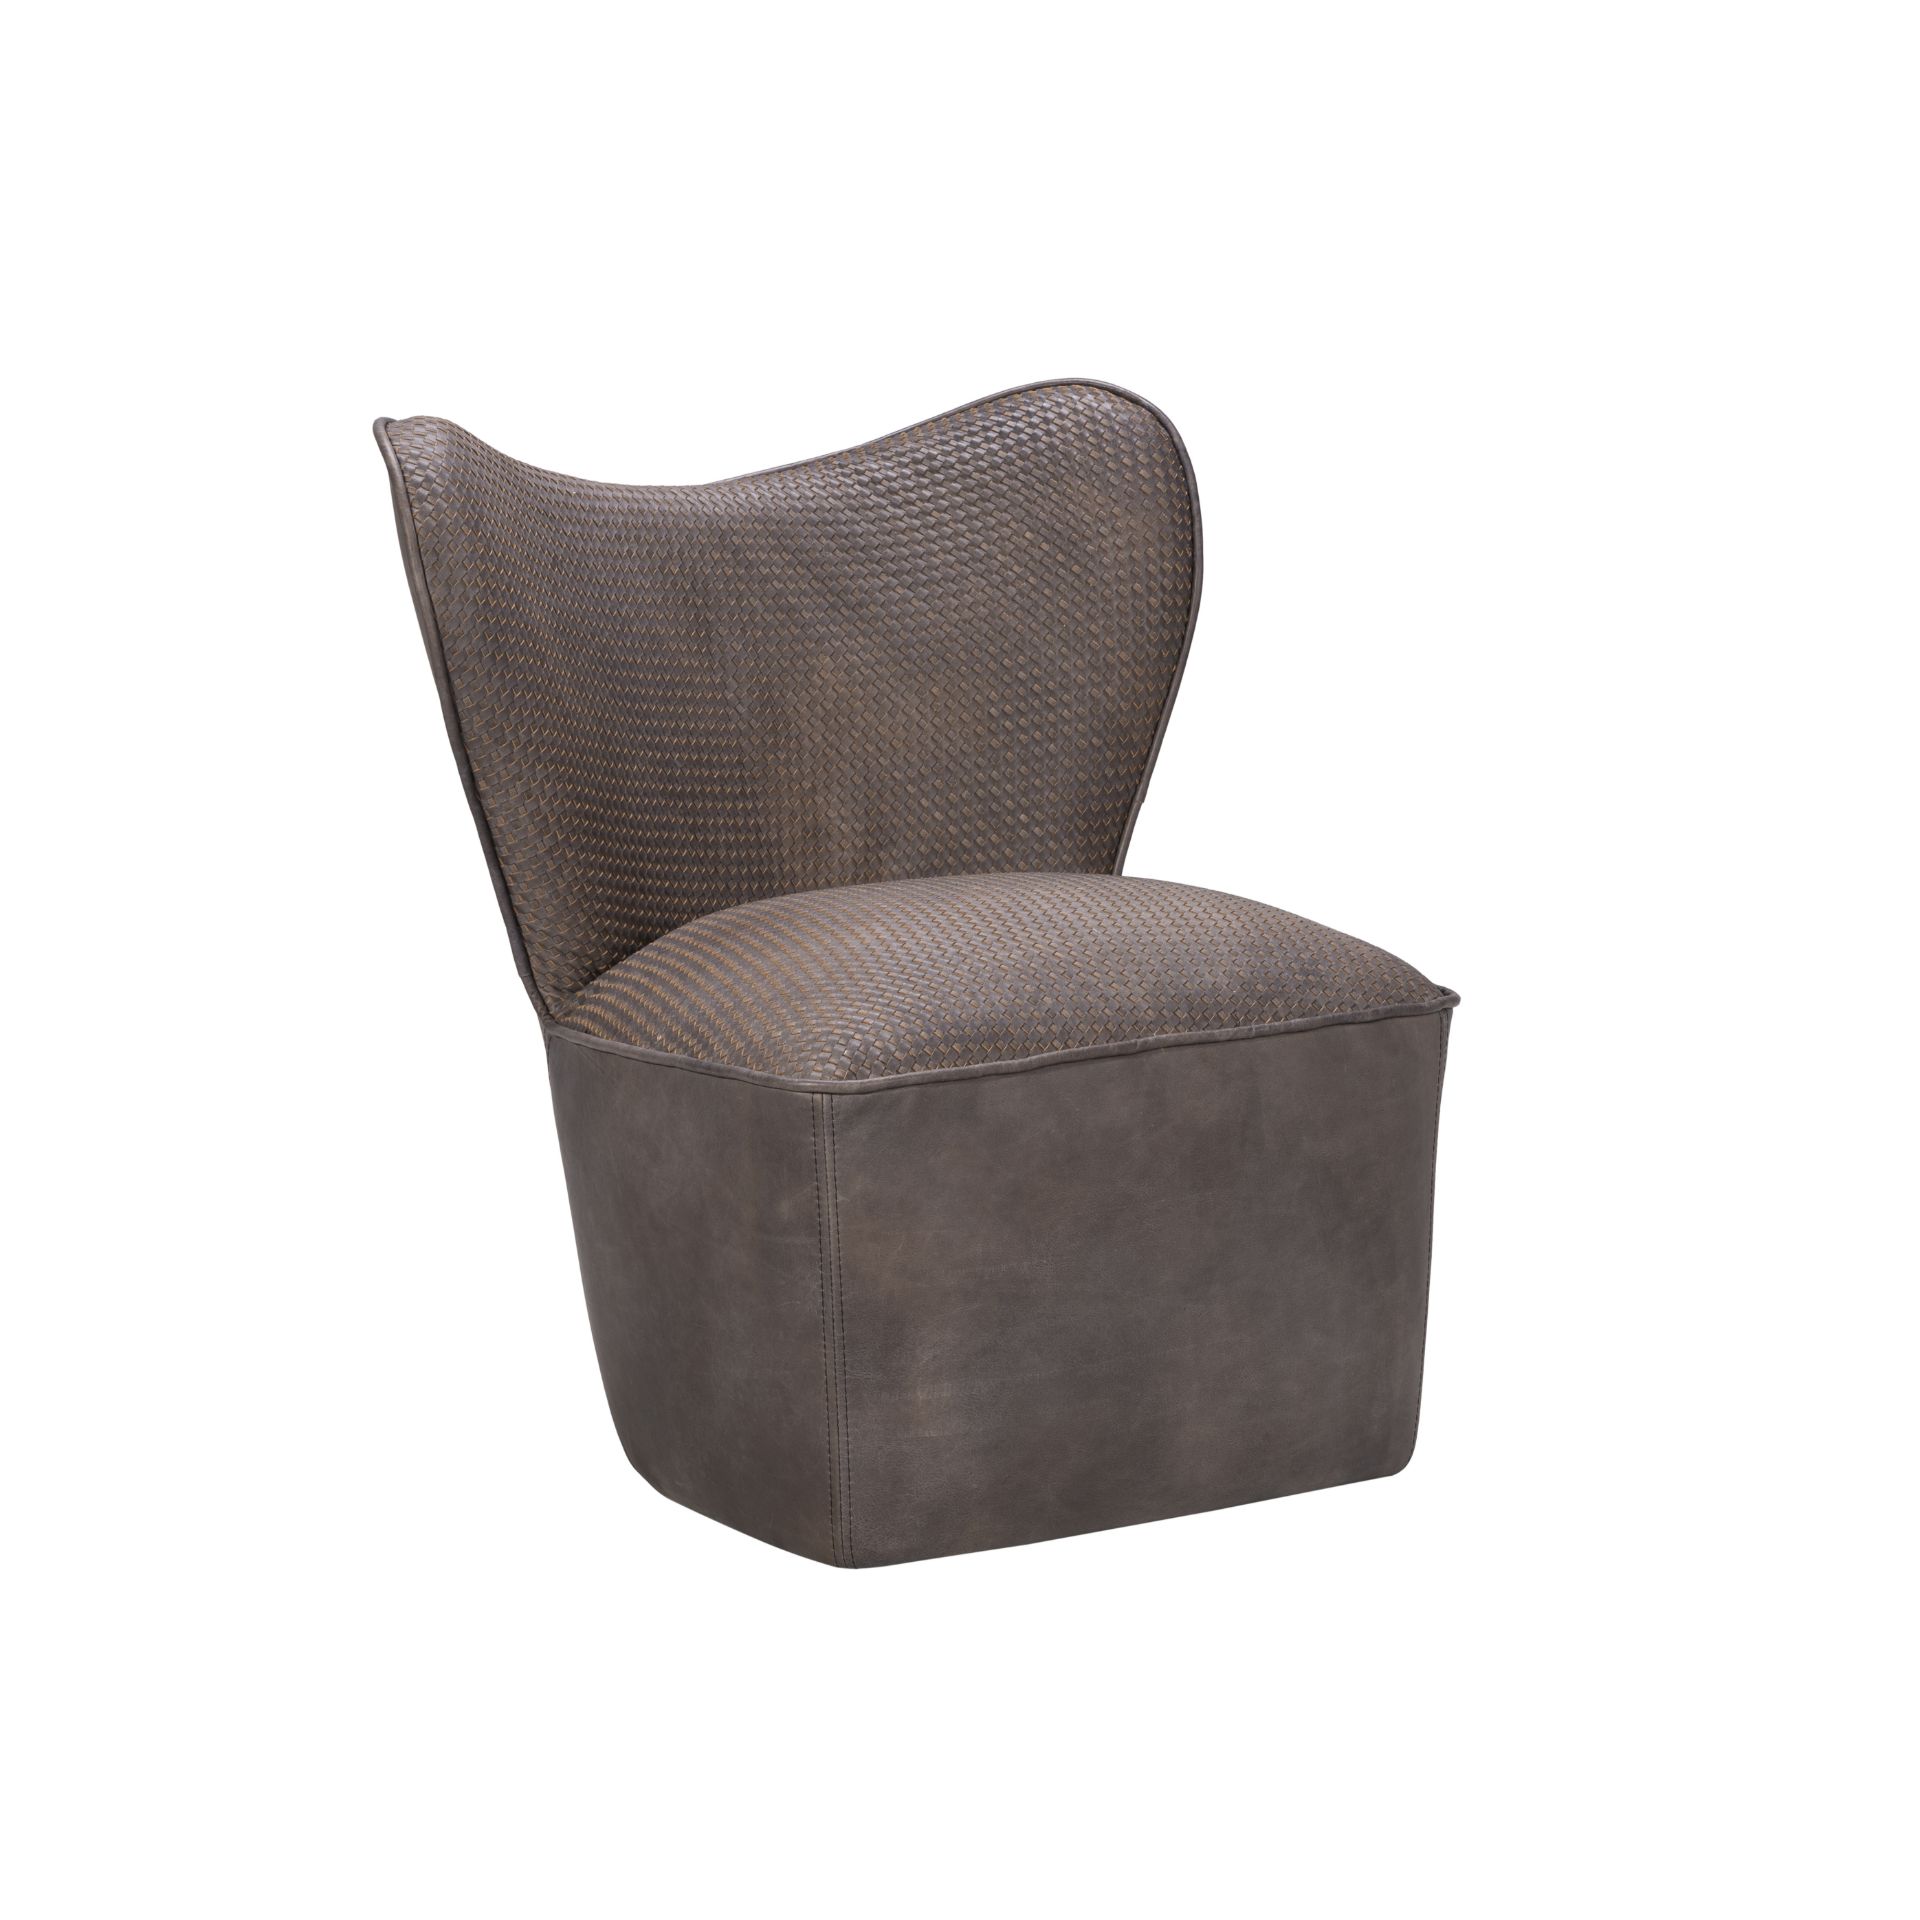 Weave Chair Destroyed Raw Leather 71 x 69 x 77 5cm RRP £1740